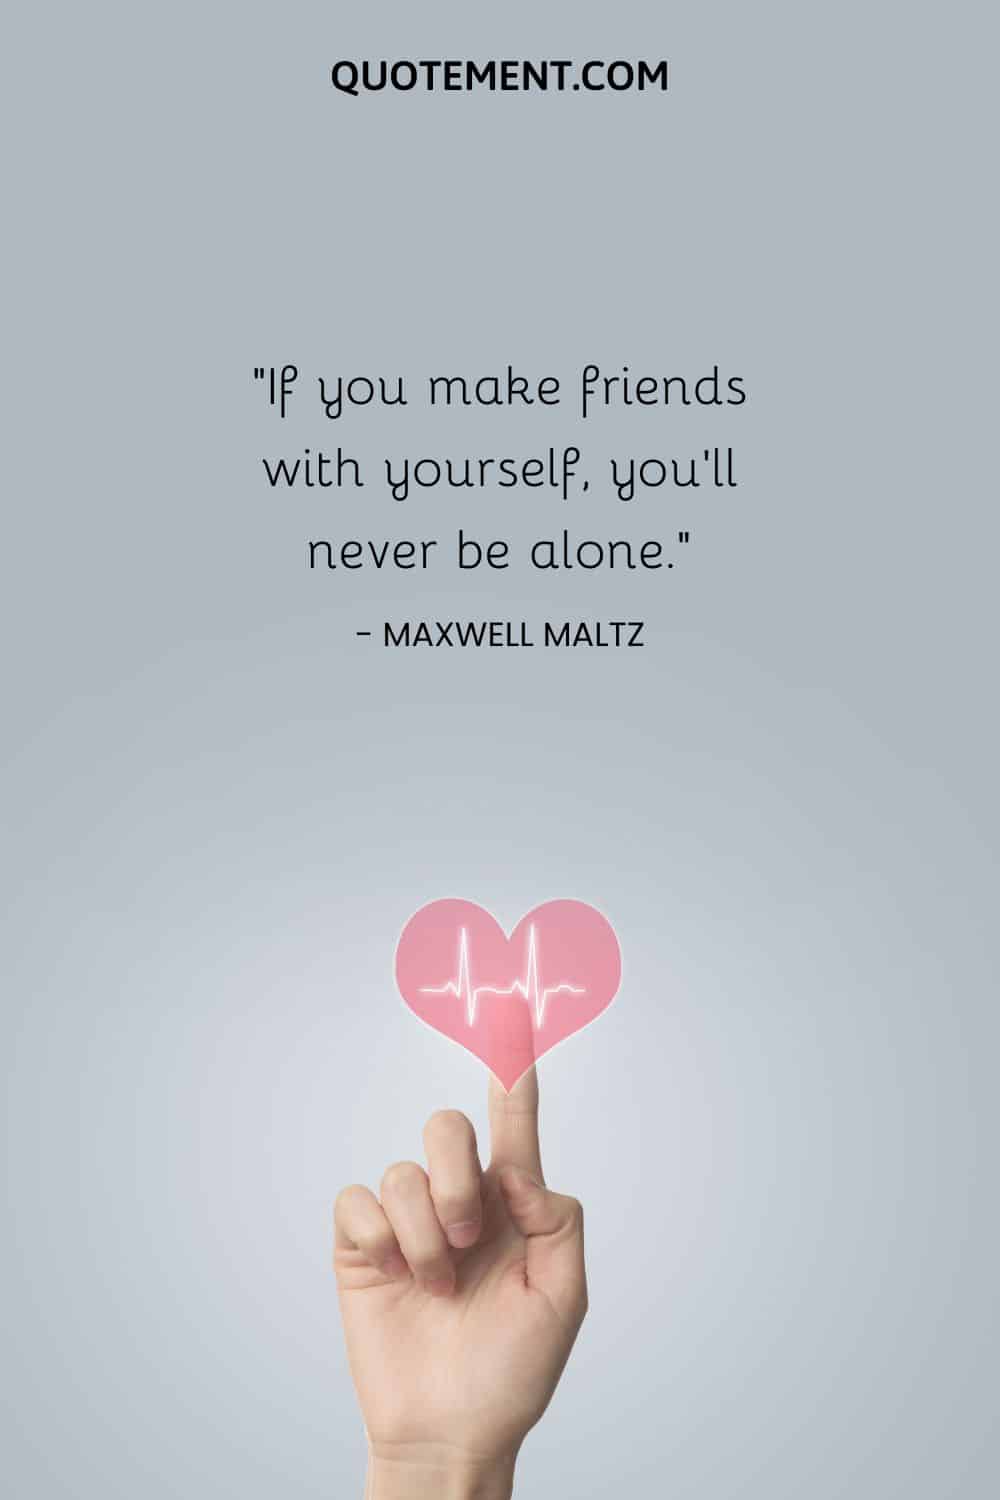 If you make friends with yourself, you'll never be alone